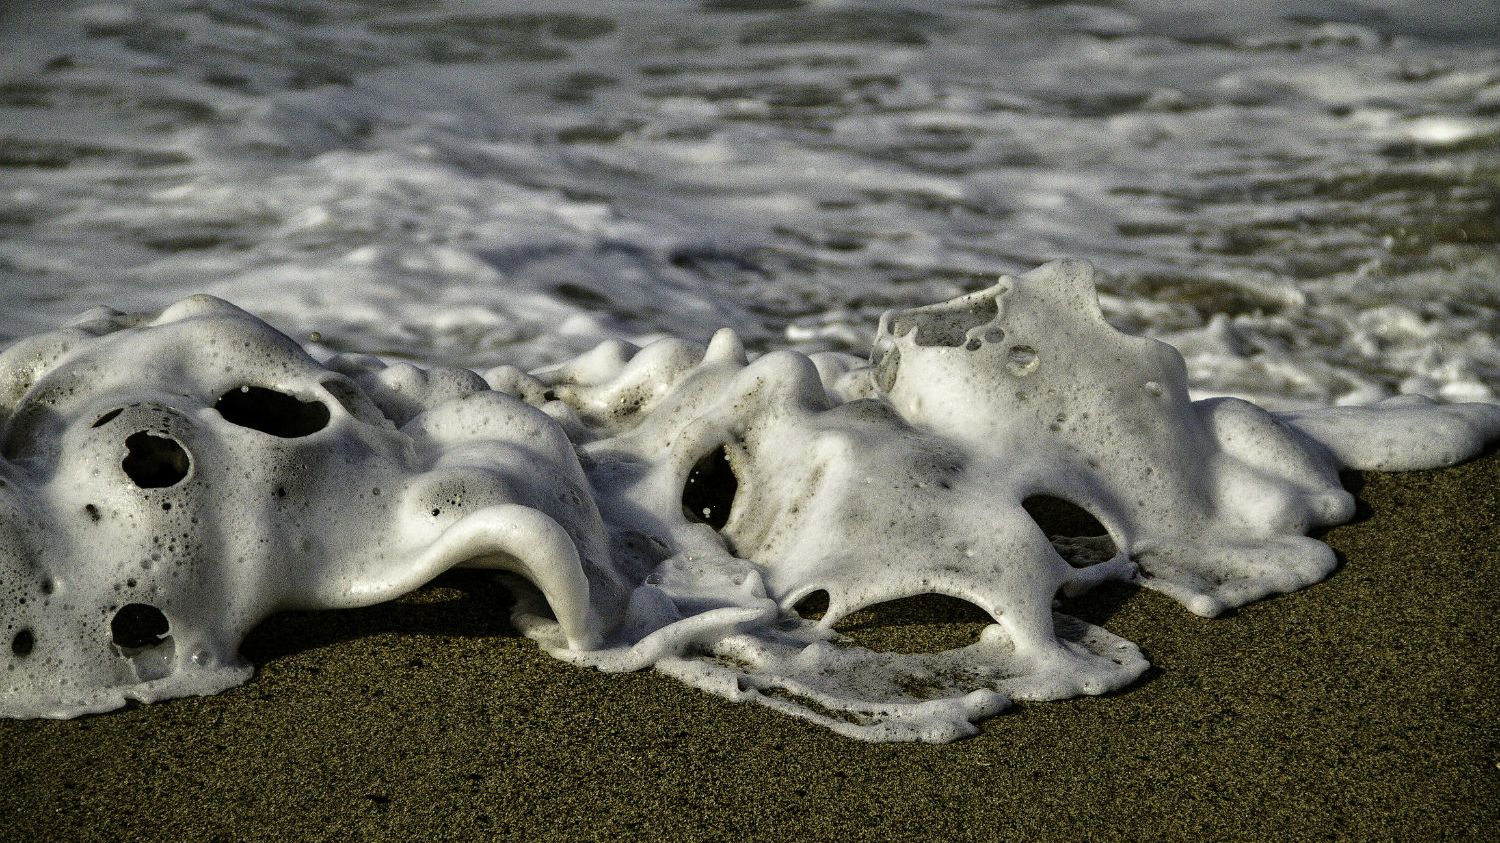 deep sea creatures washed up on shore meaning